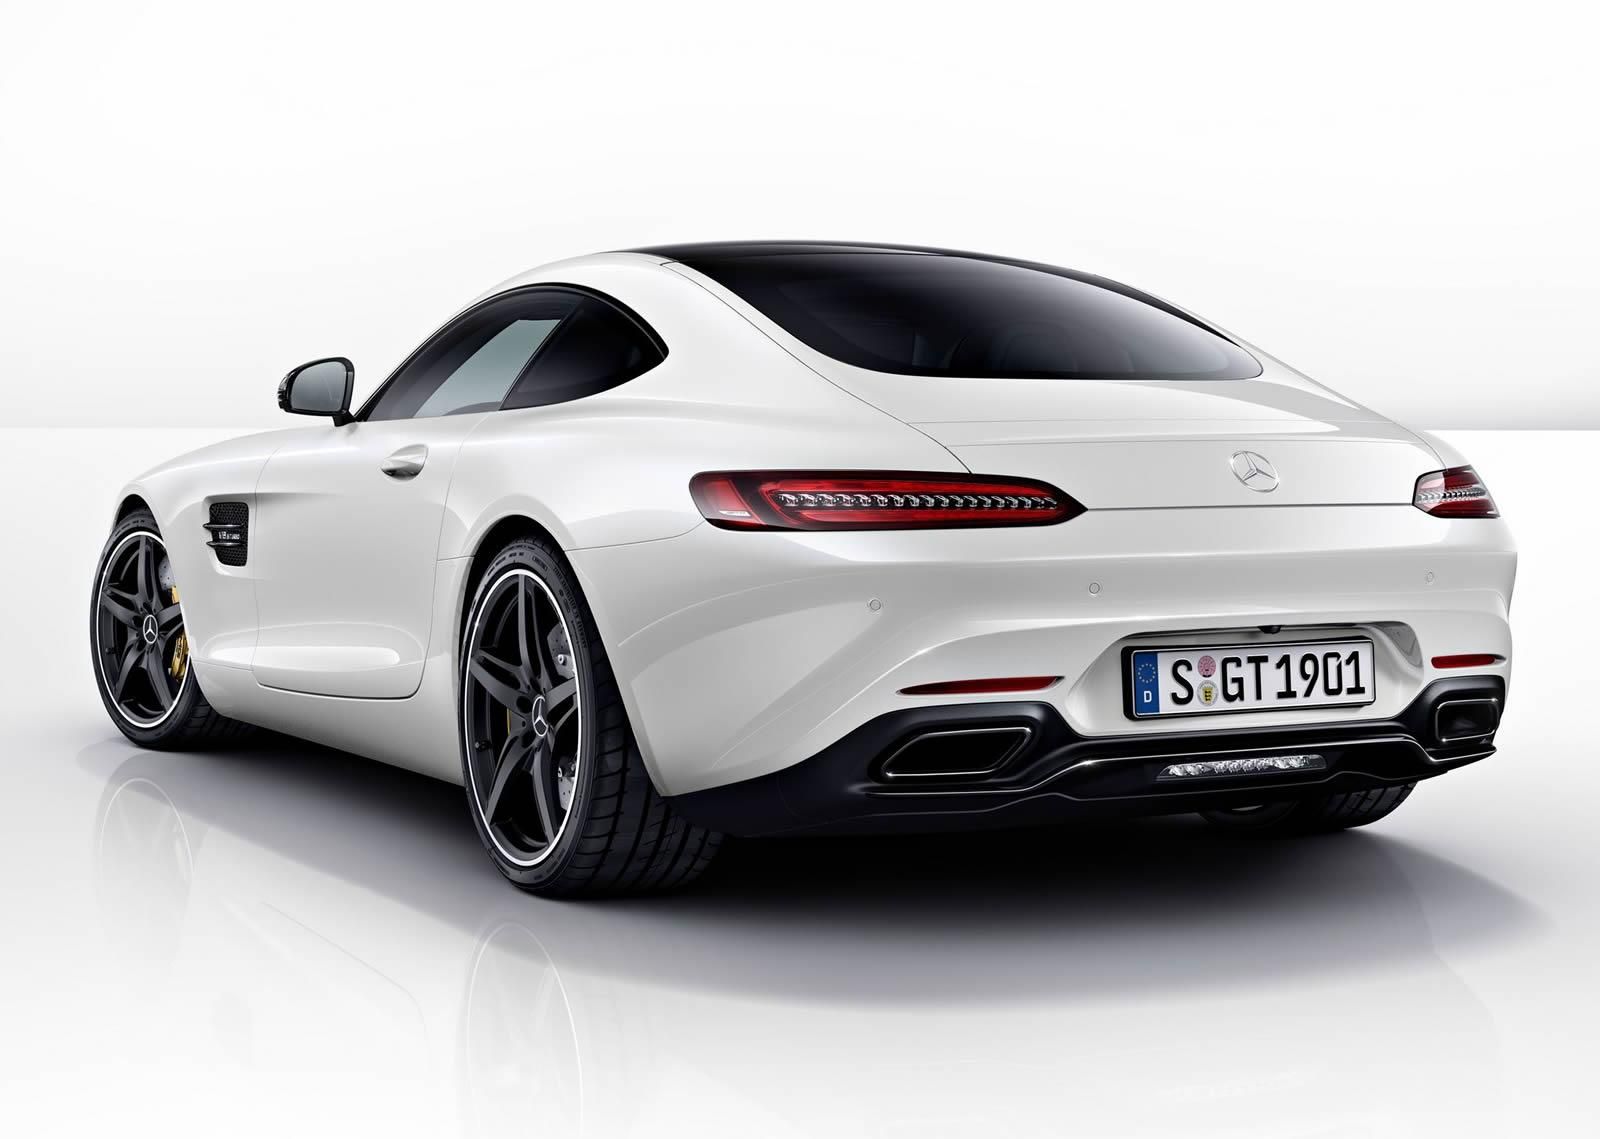 2015 Mercedes-AMG GT Night Package